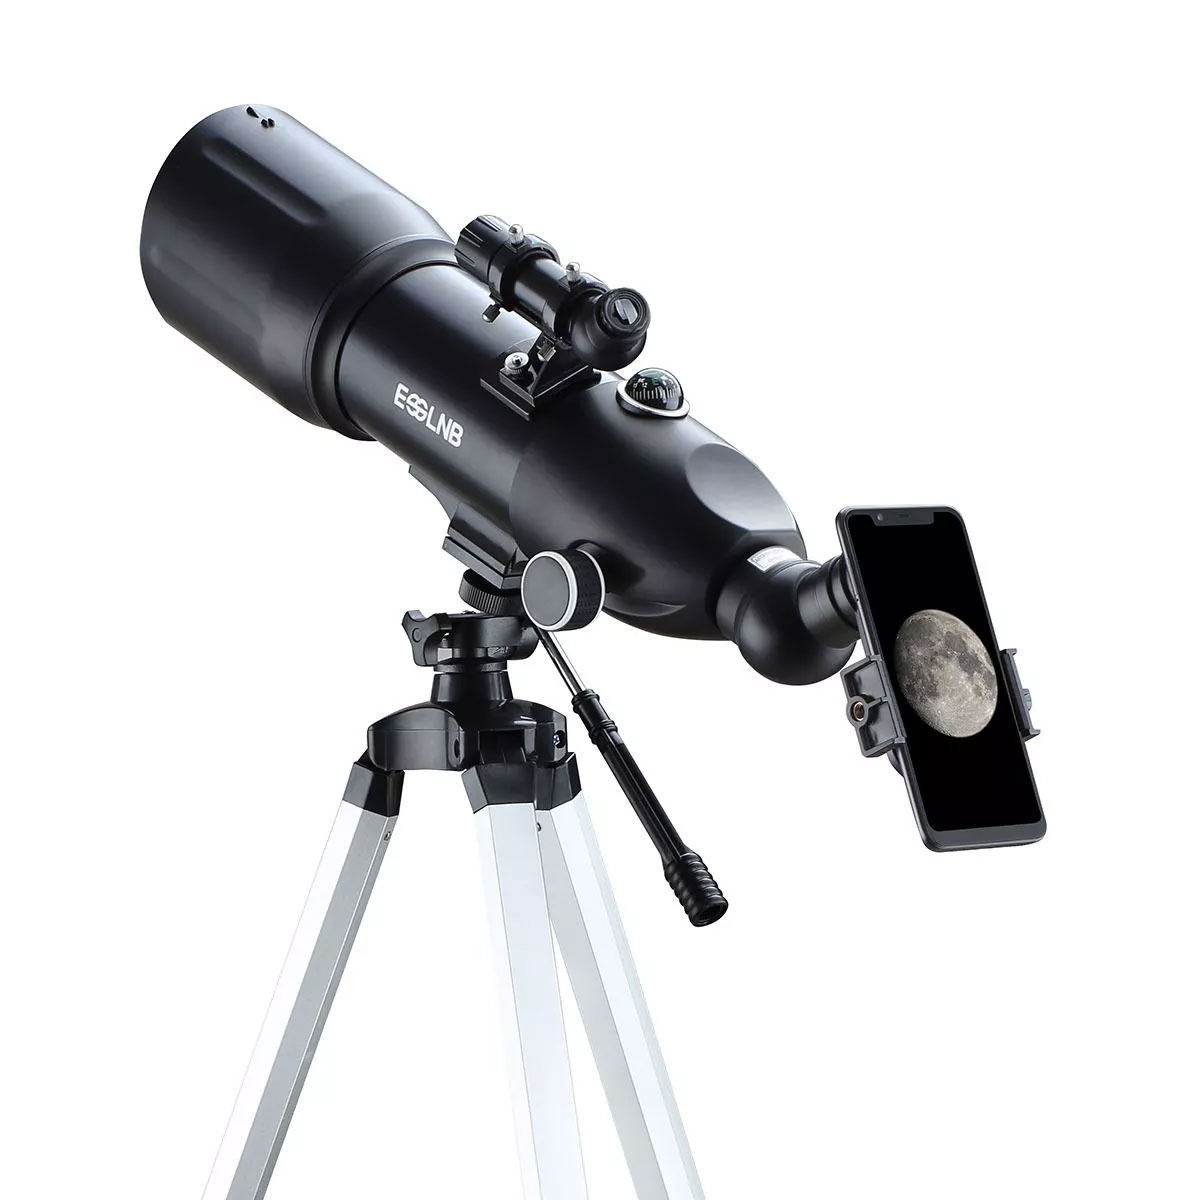 ESSLNB Astronomical Observer Telescope 80mm 400X Refractor with Backpack 